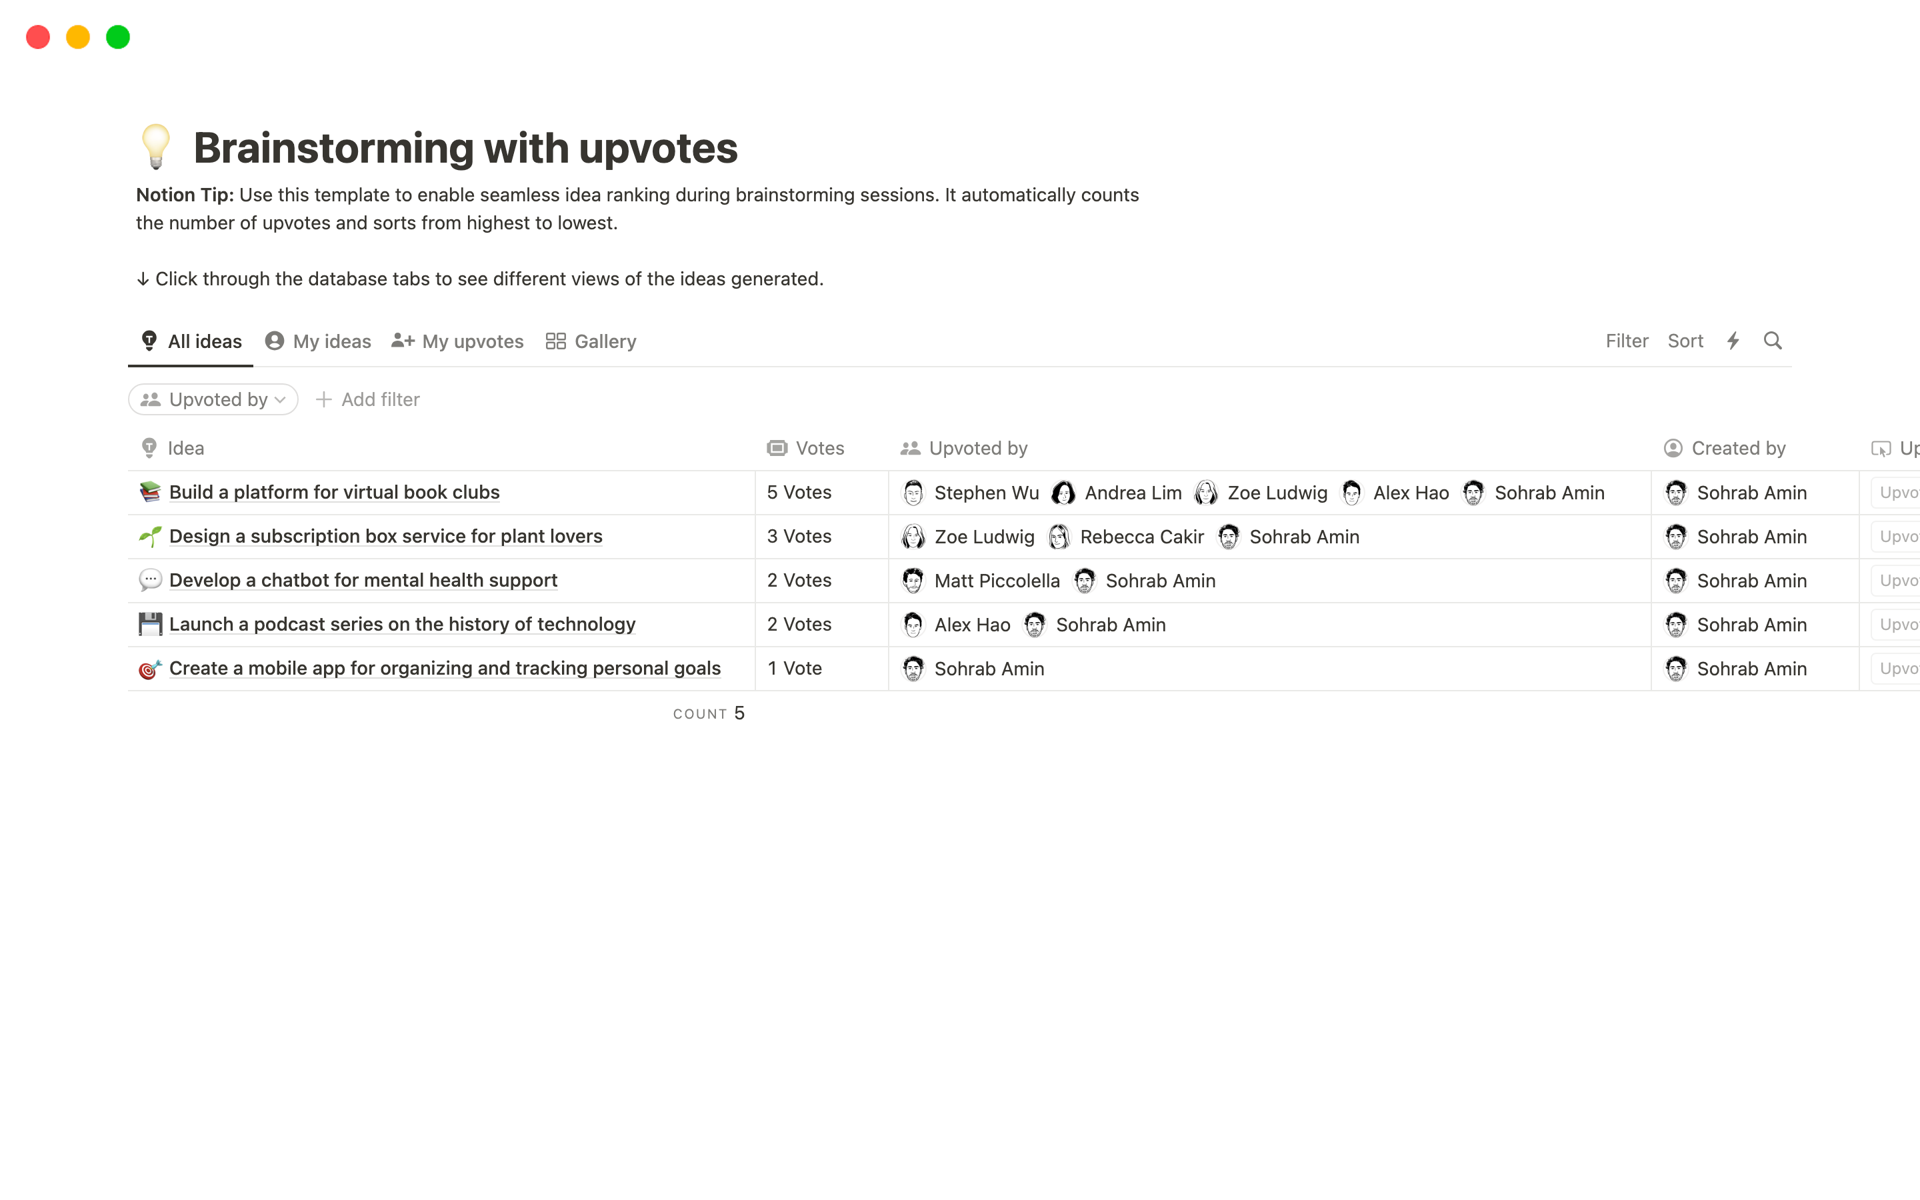 Utilize Notion’s formulas to automatically tally upvotes for different ideas.